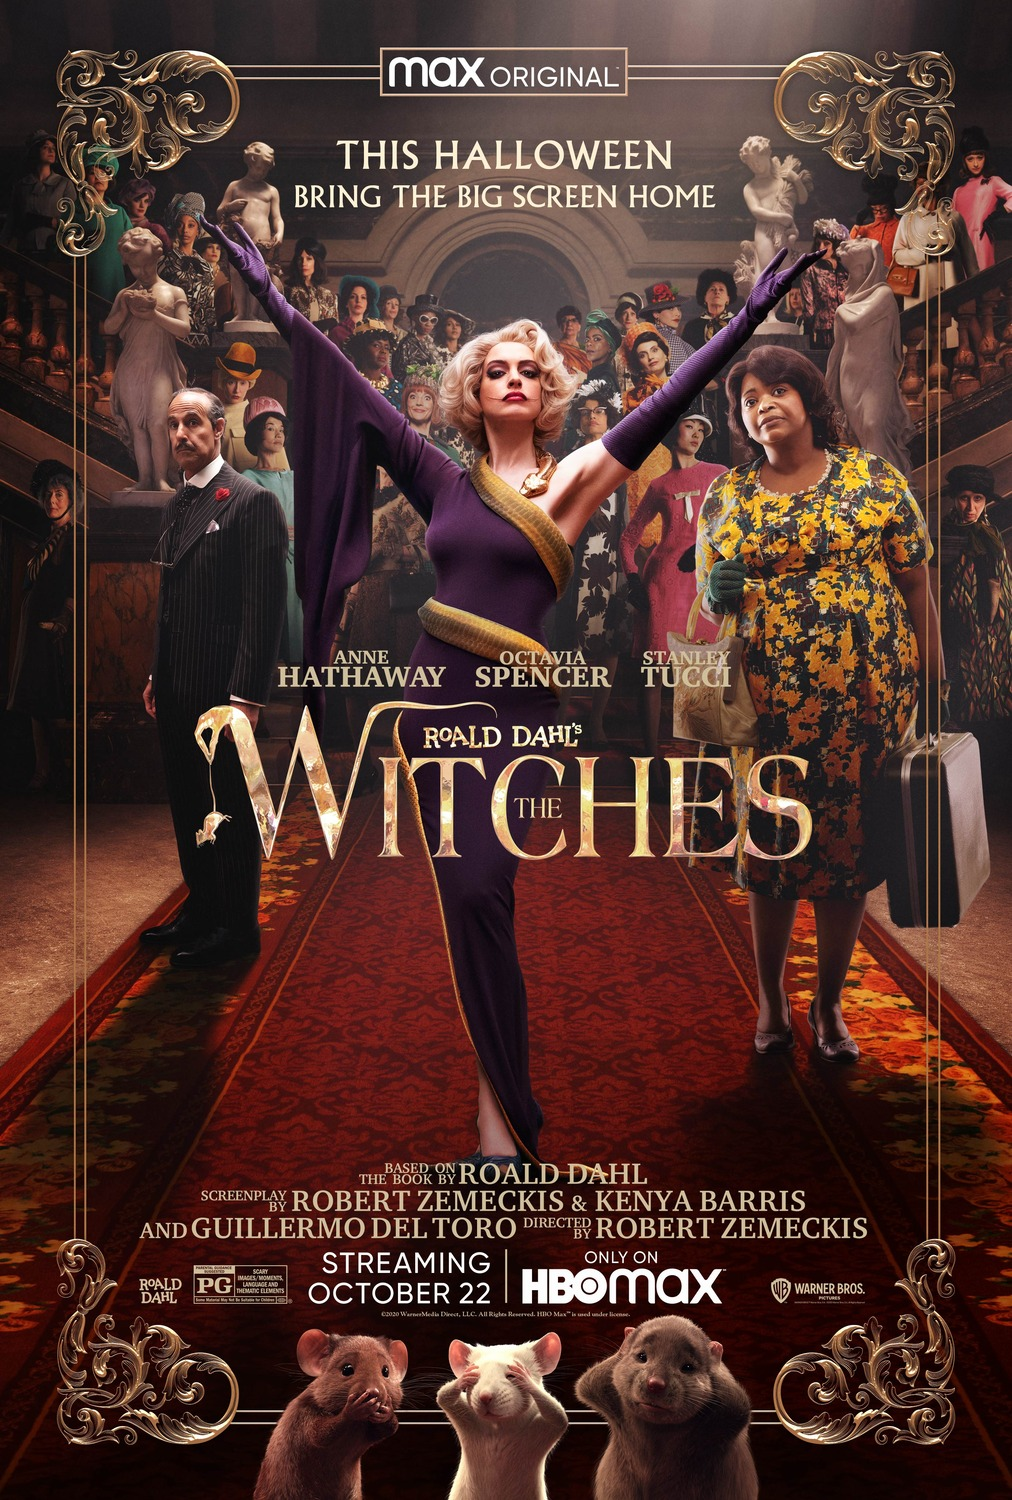 The Witches (2020 film) Warner Bros image image picture